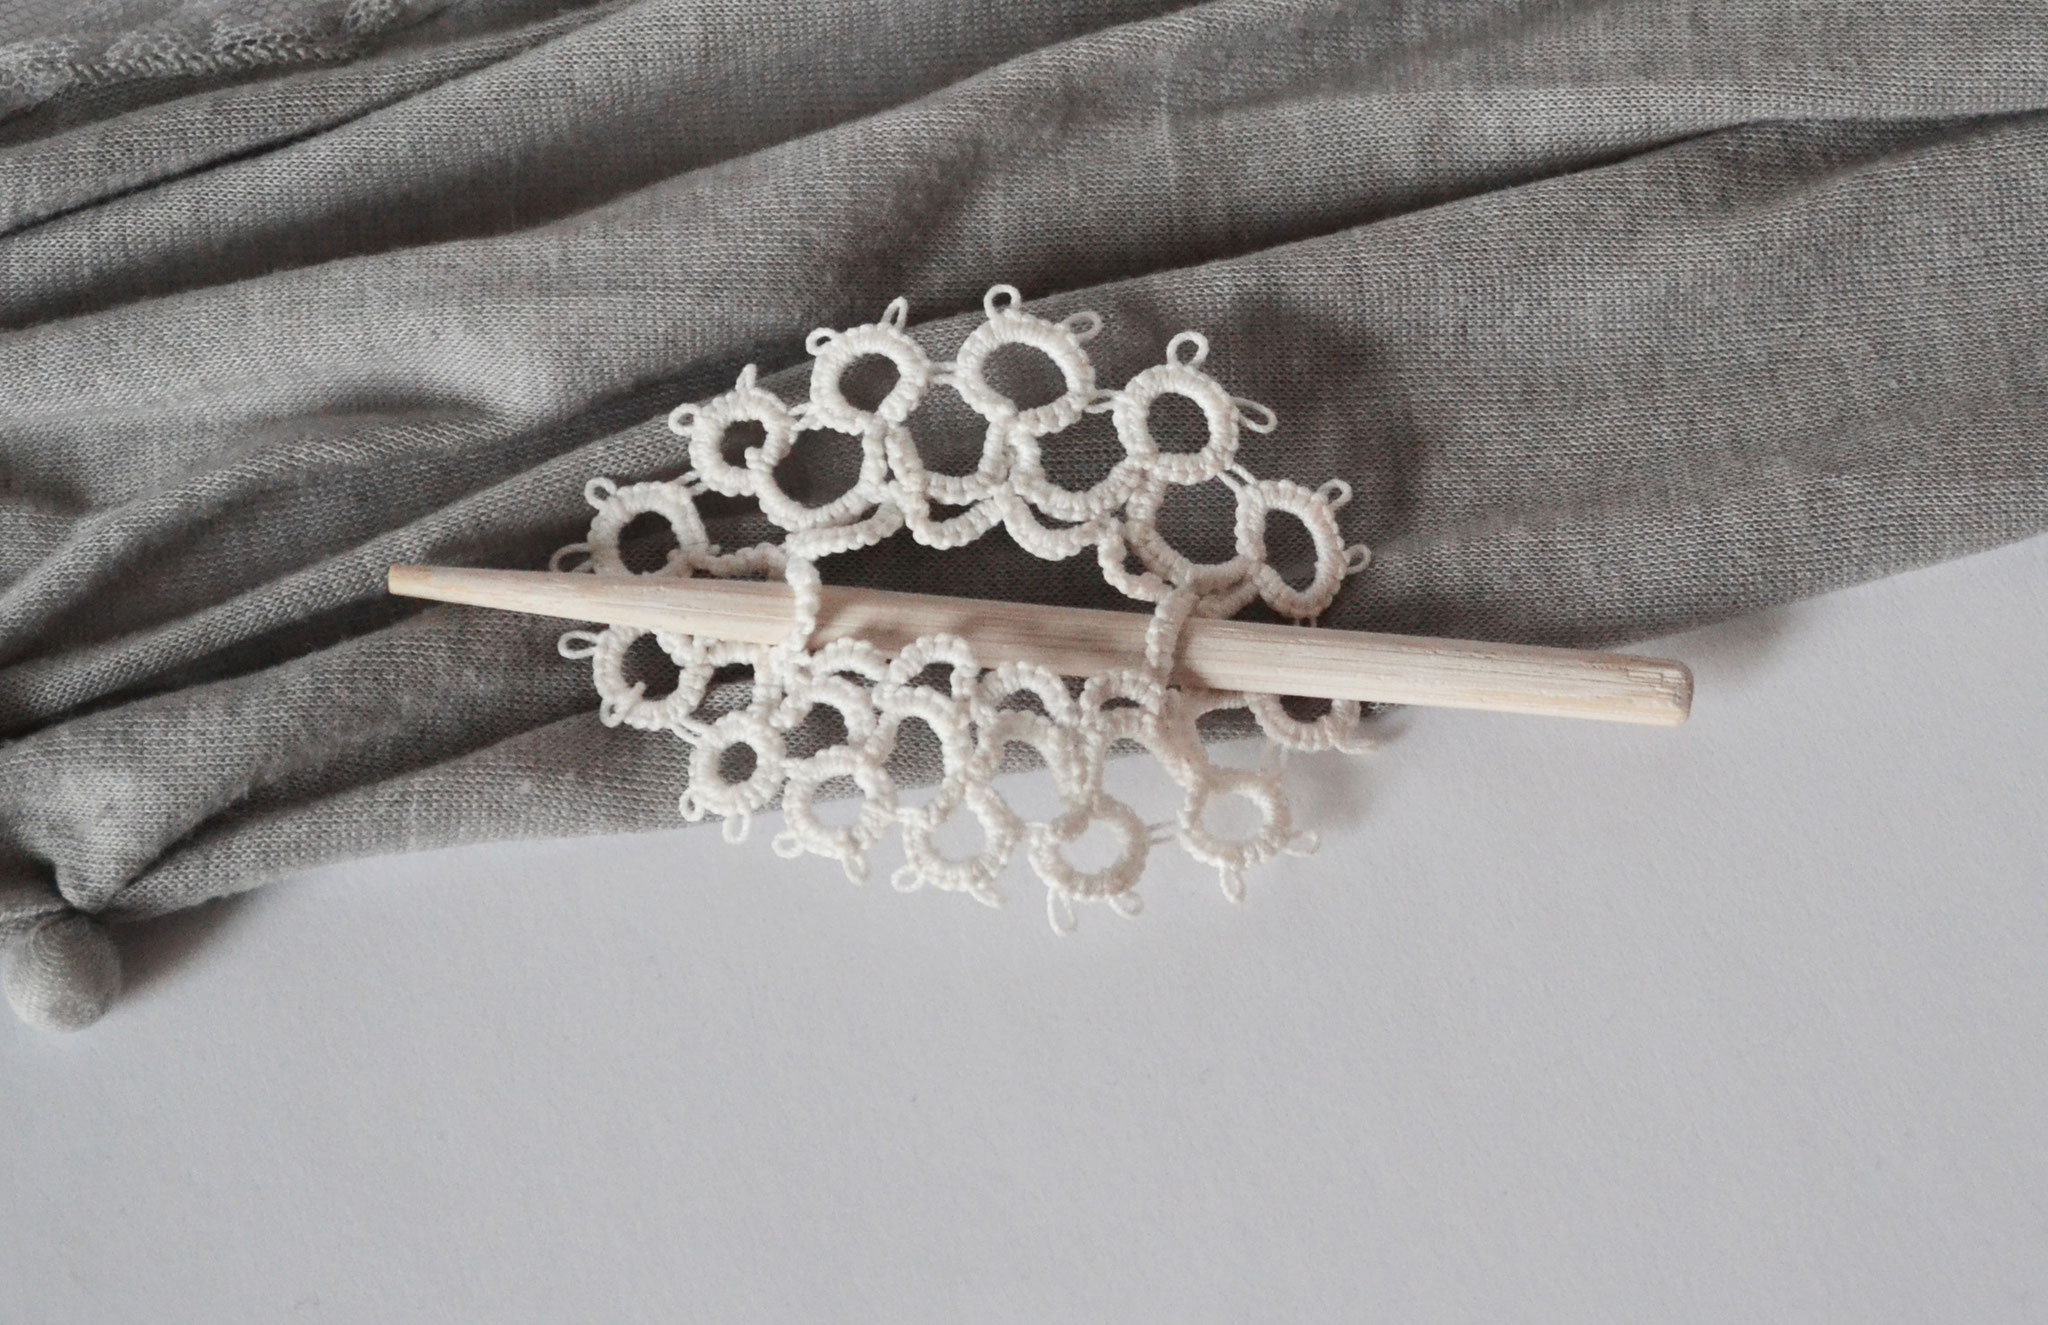 hairpin, made with the tatting technique